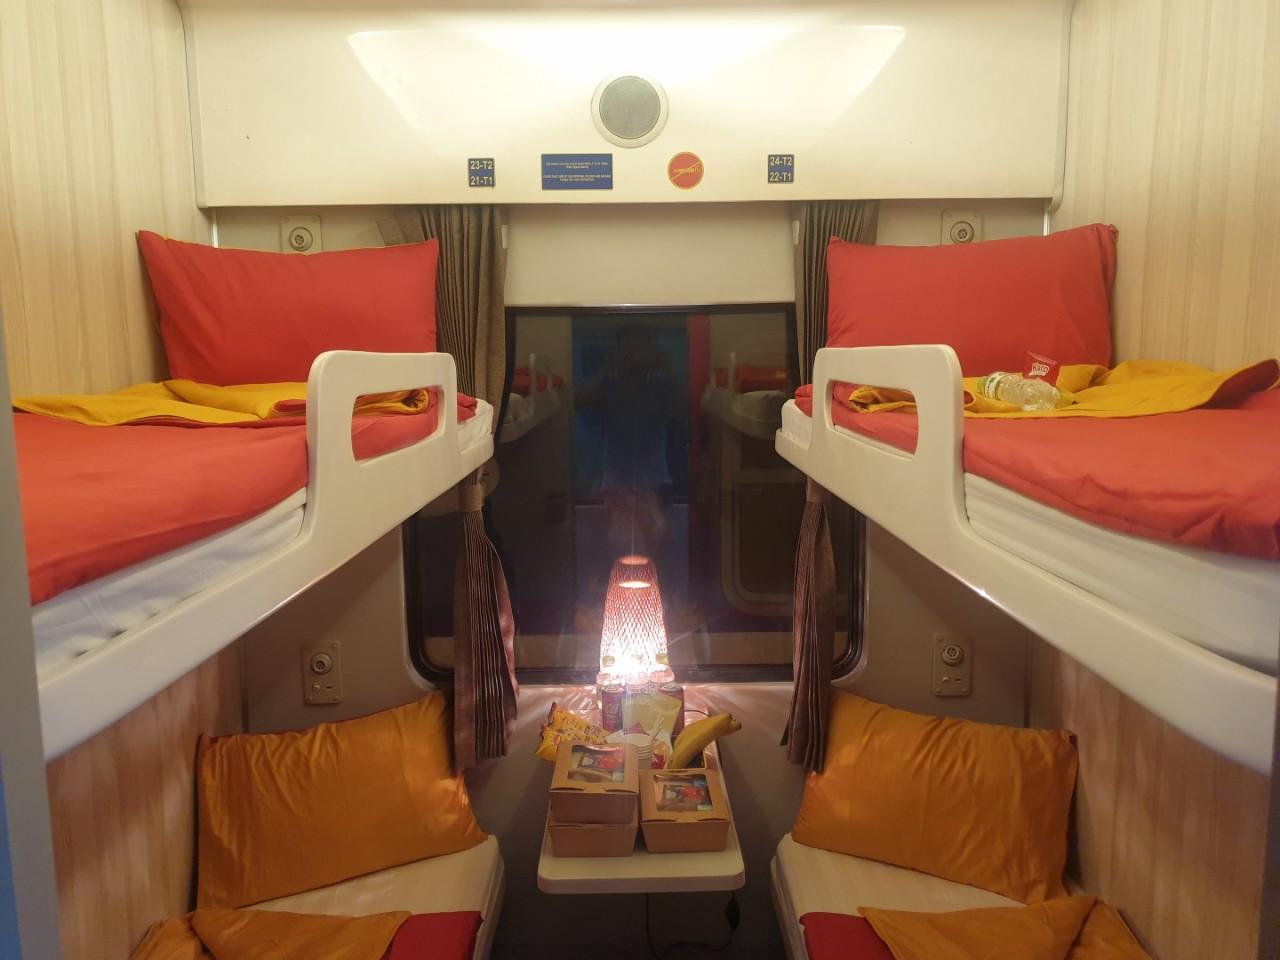 Ninh Binh - Dong Hoi on Lotus Train SE19 (22h00 - 6h02) available from 02 March 2023 (Deluxe 4 Berths Cabin, One Way)